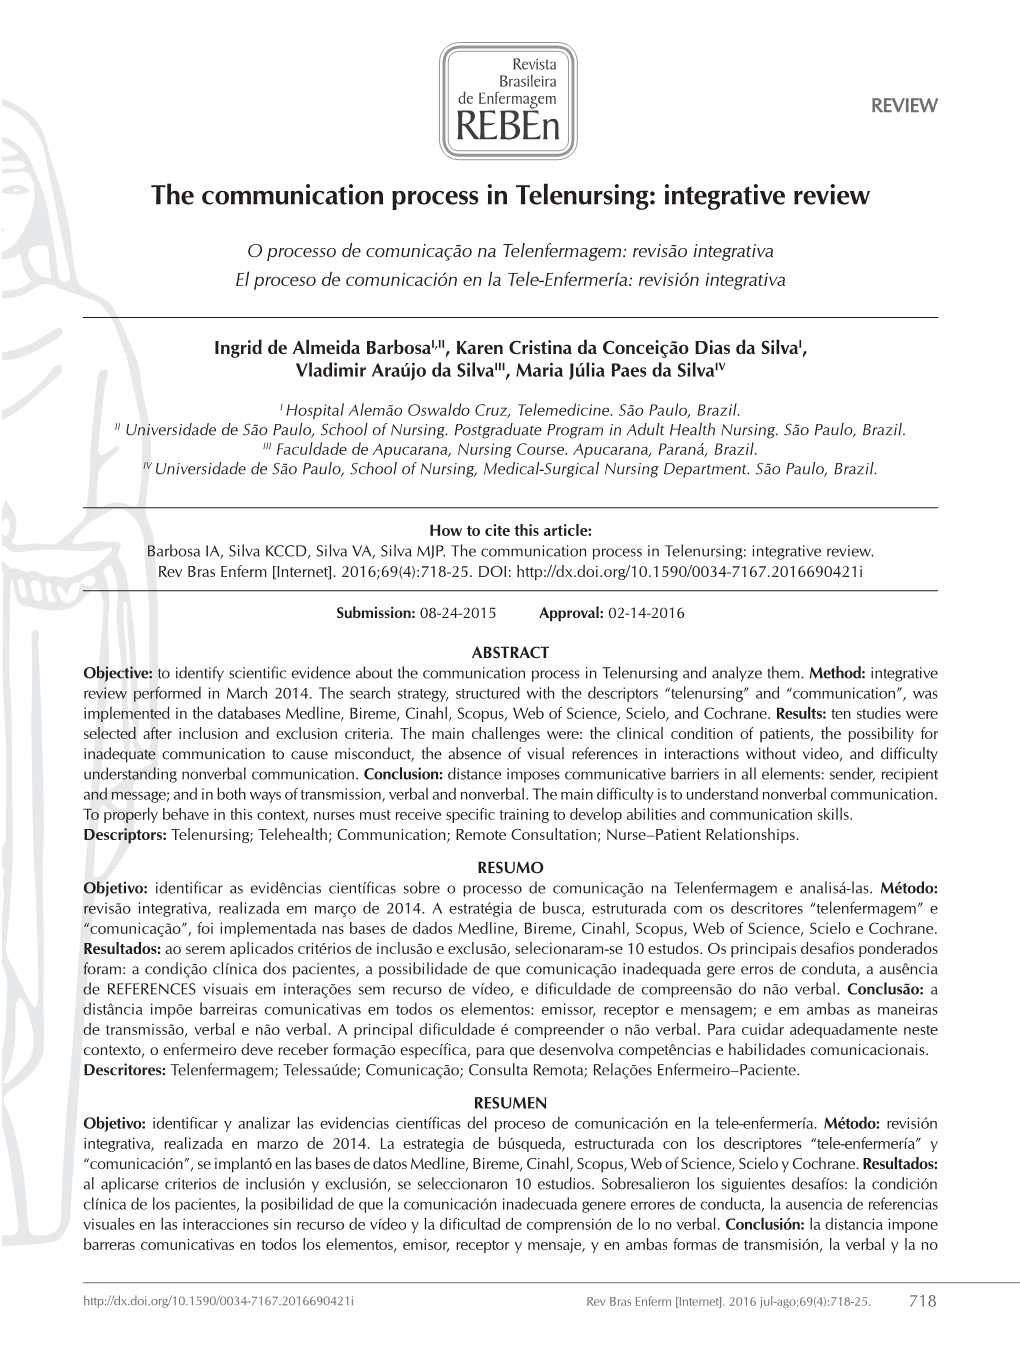 The Communication Process in Telenursing: Integrative Review